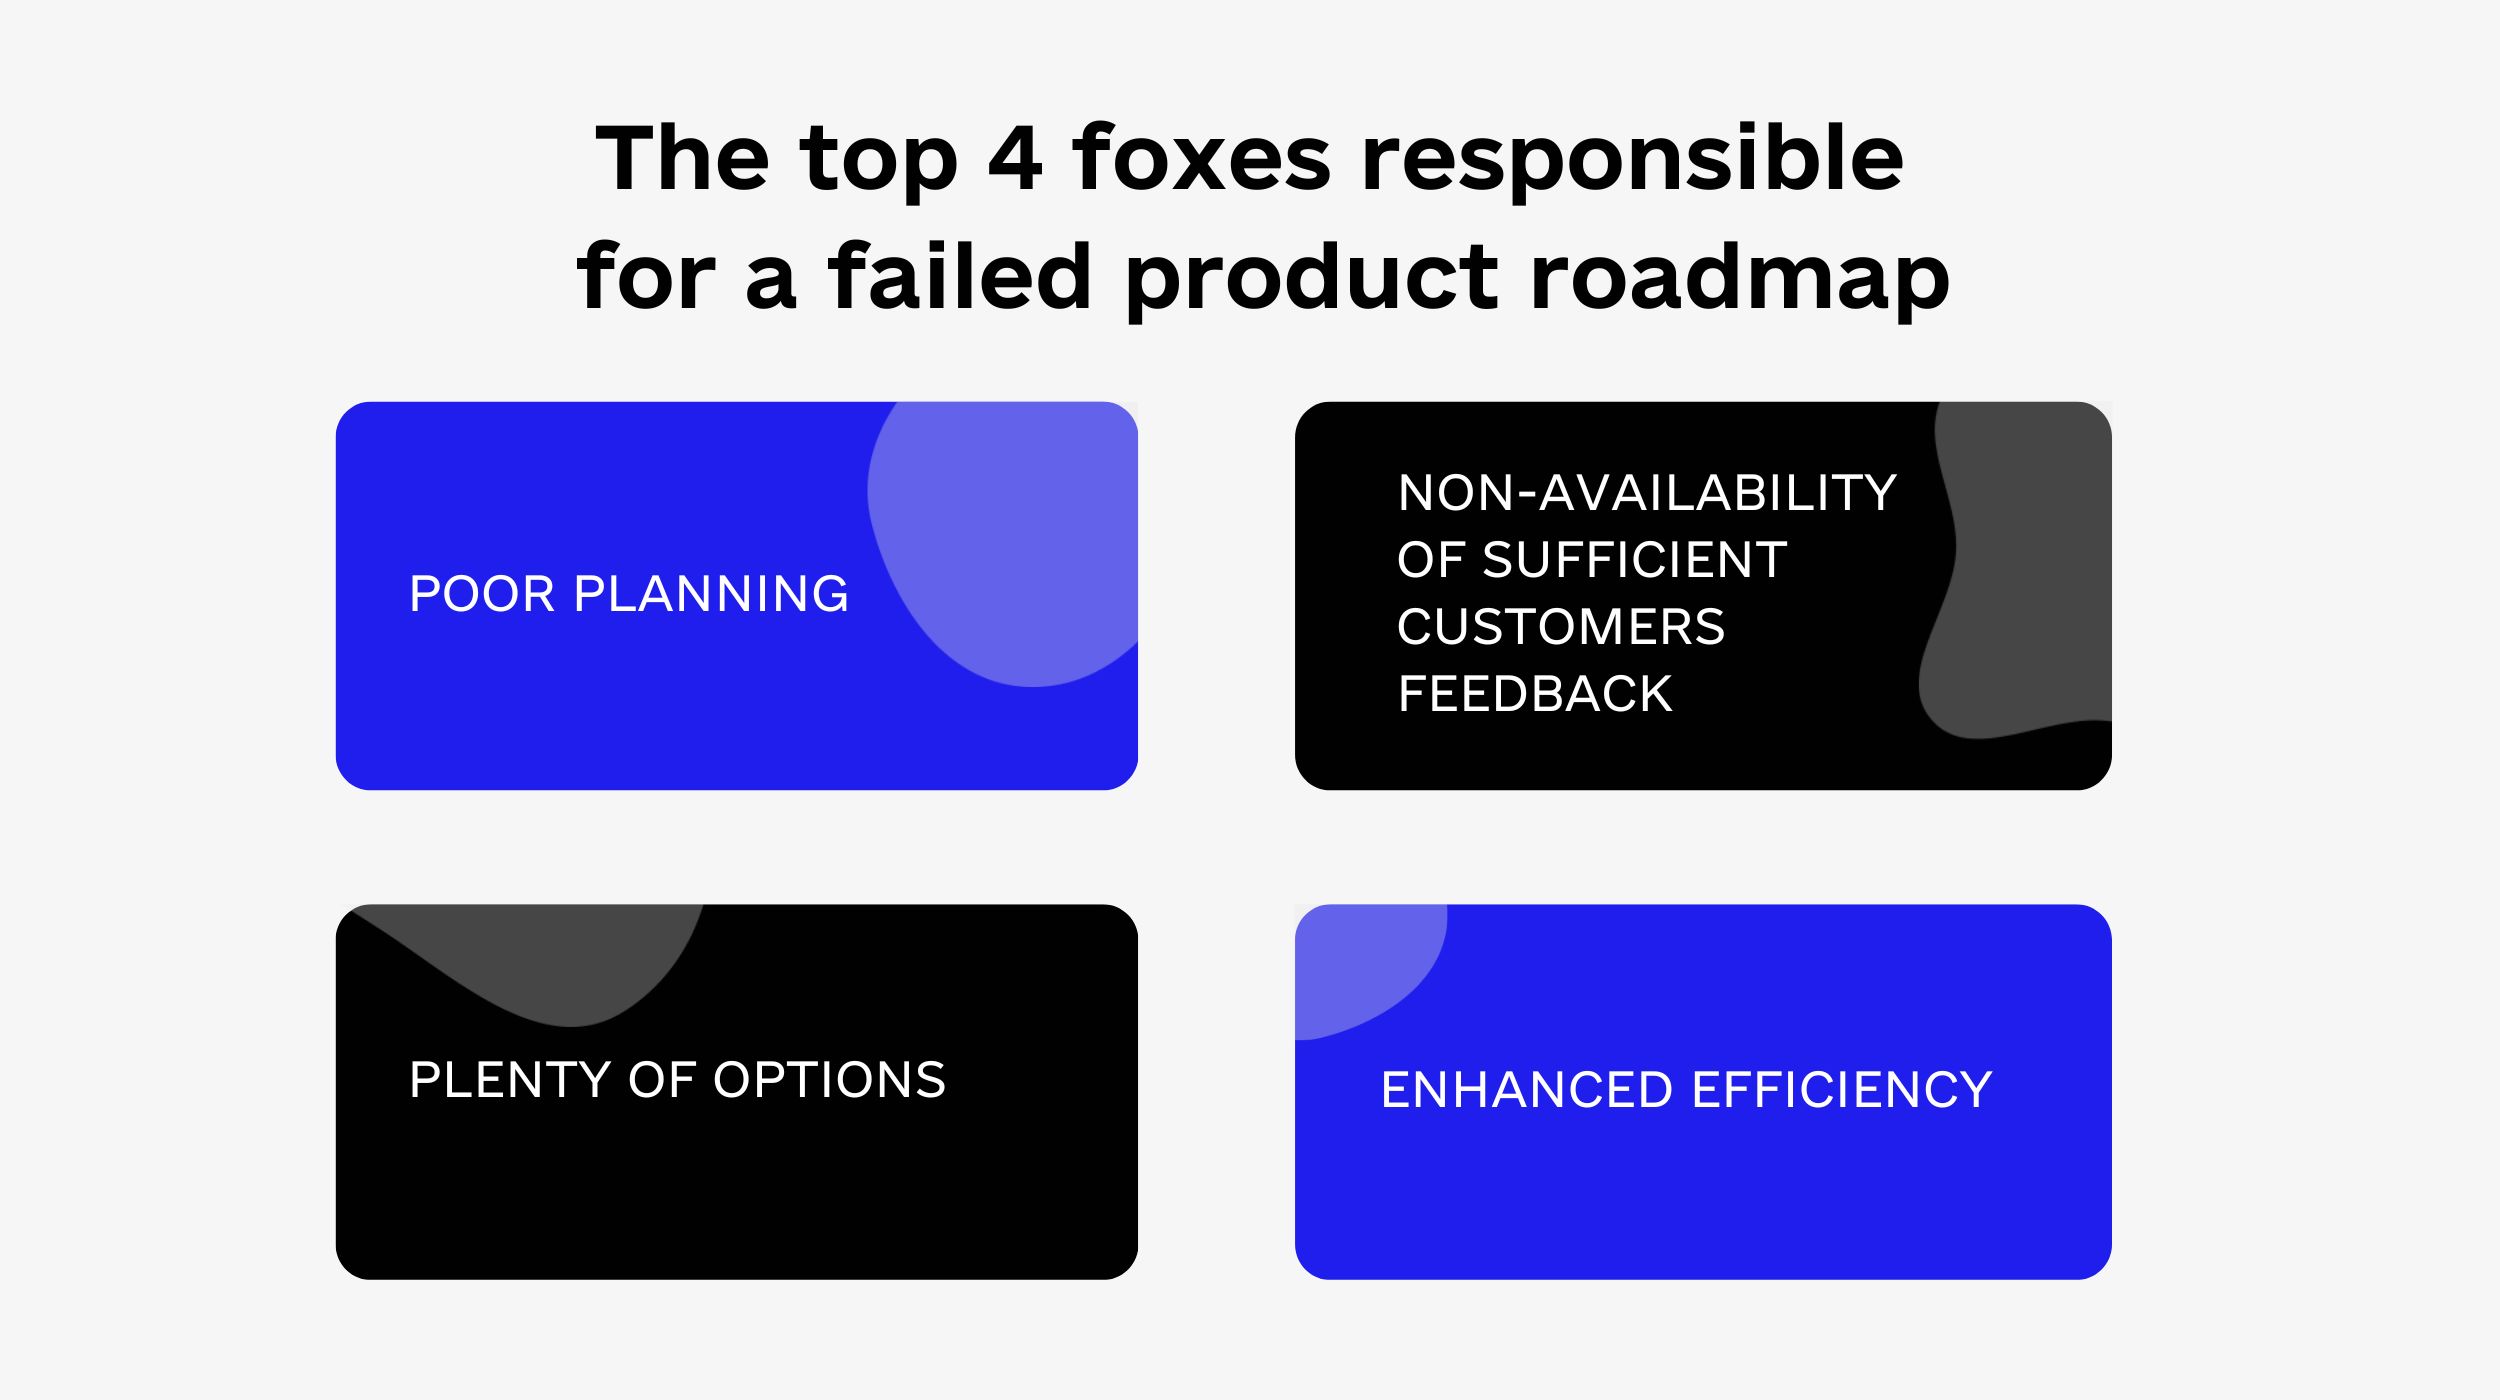 The top 4 foxes responsible for a failed product roadmap